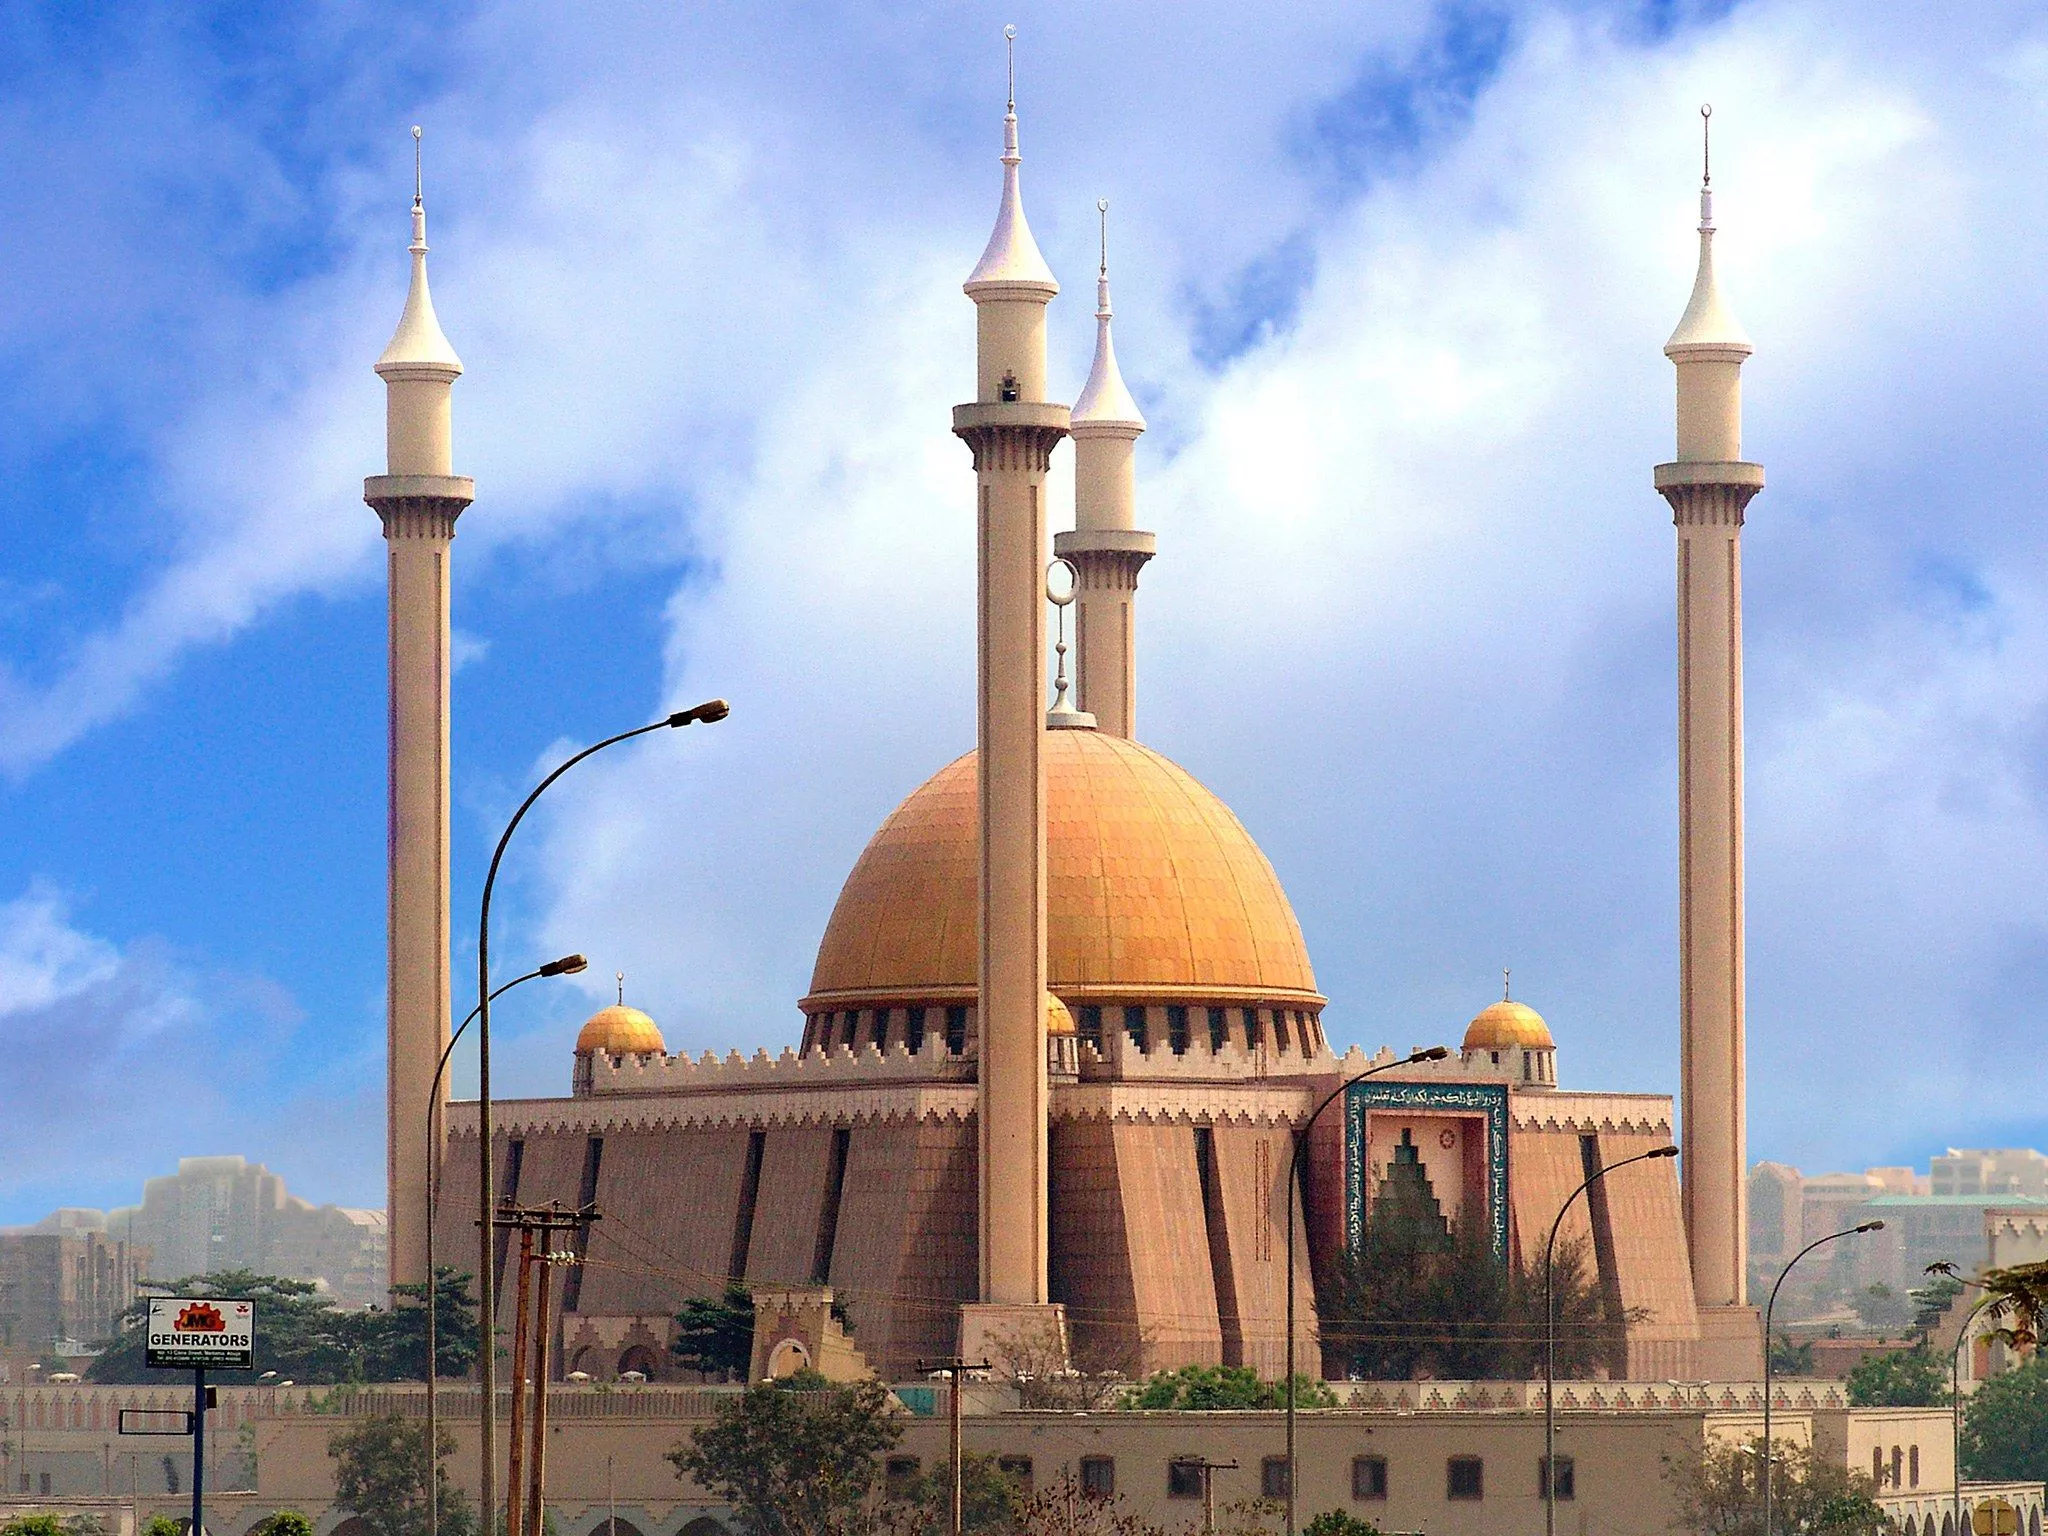 Abuja National Mosque in Nigeria, Africa | Architecture - Rated 3.7